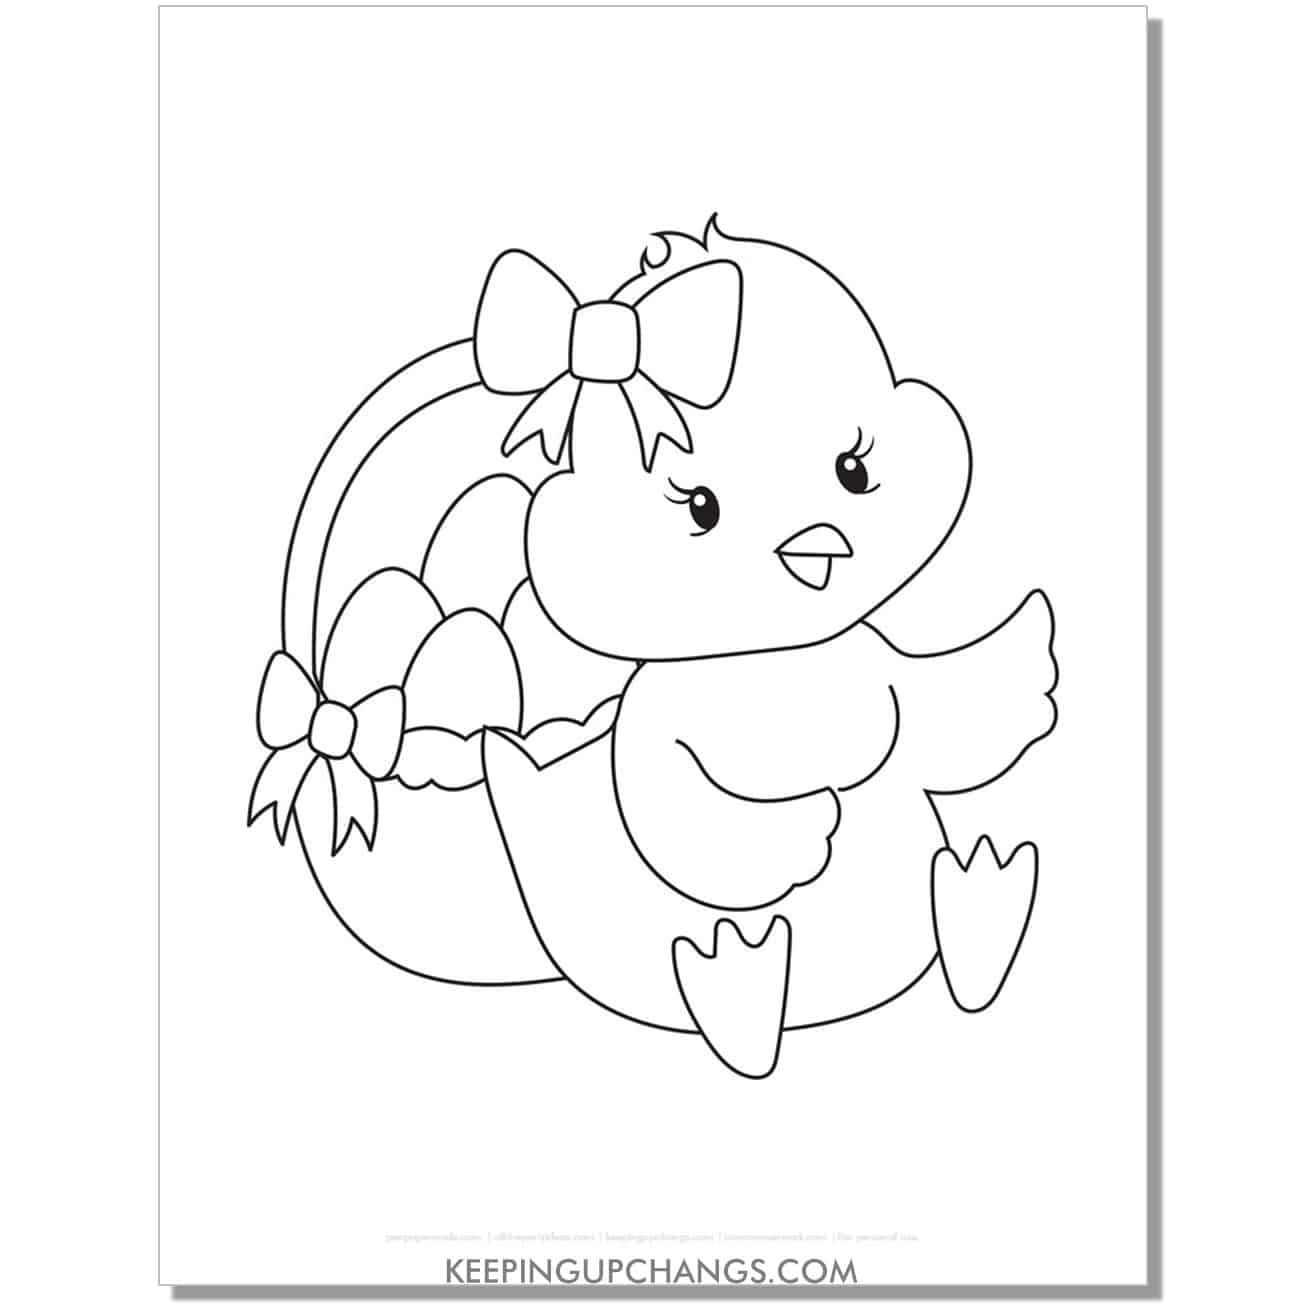 Easter basket next to adorable baby chick coloring page, sheet.